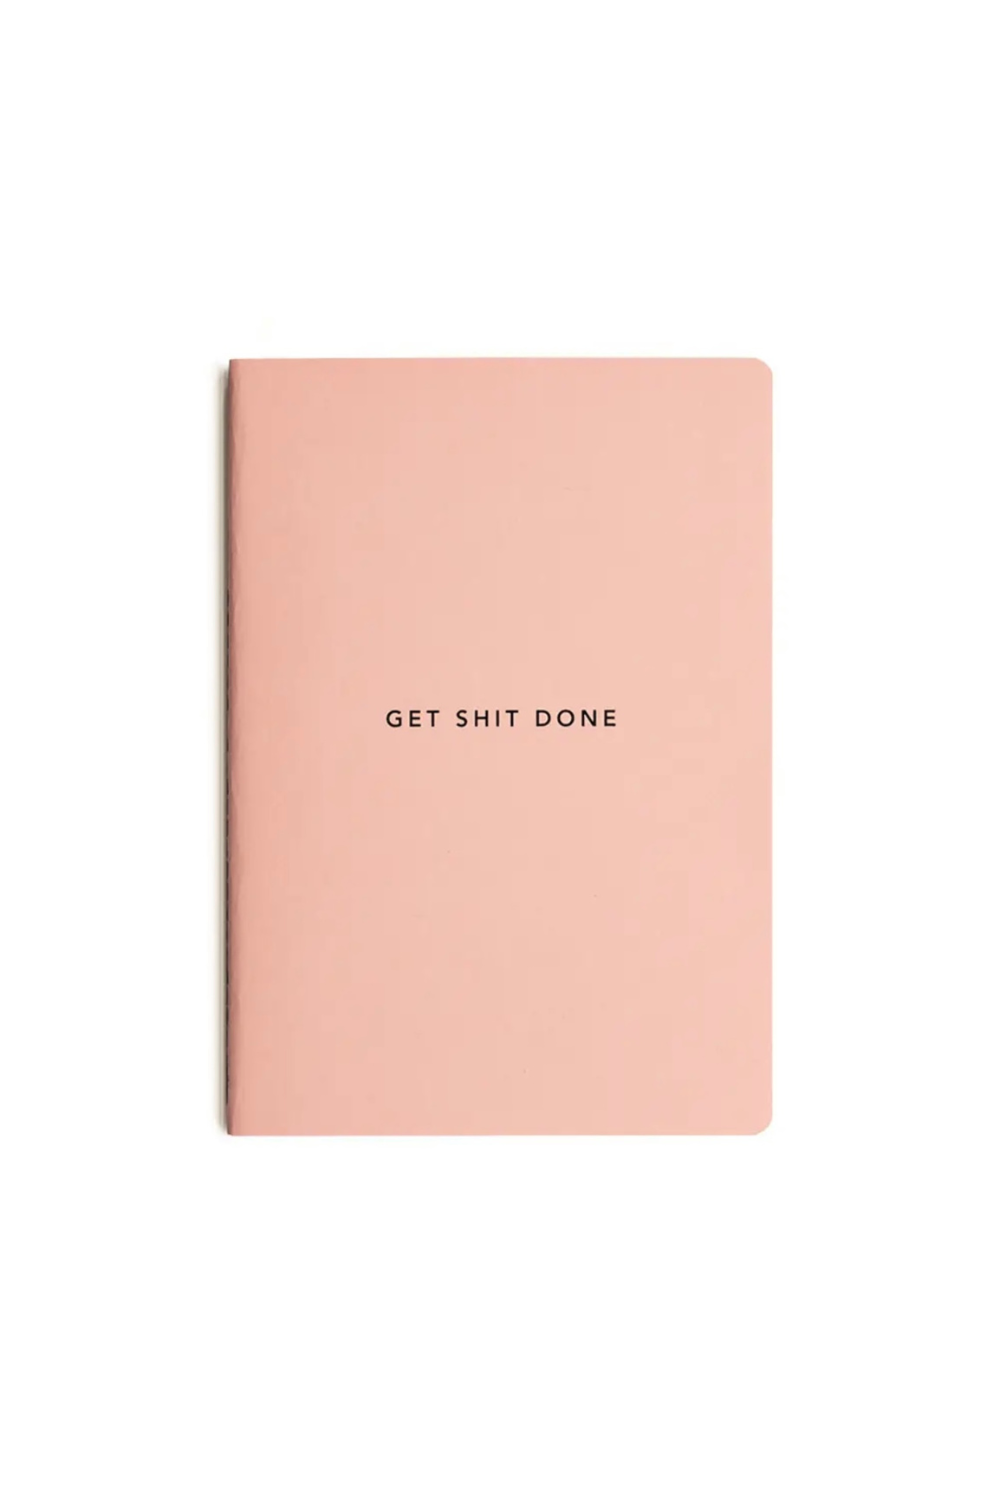 Get Shit Done Minimal A5 Notebook